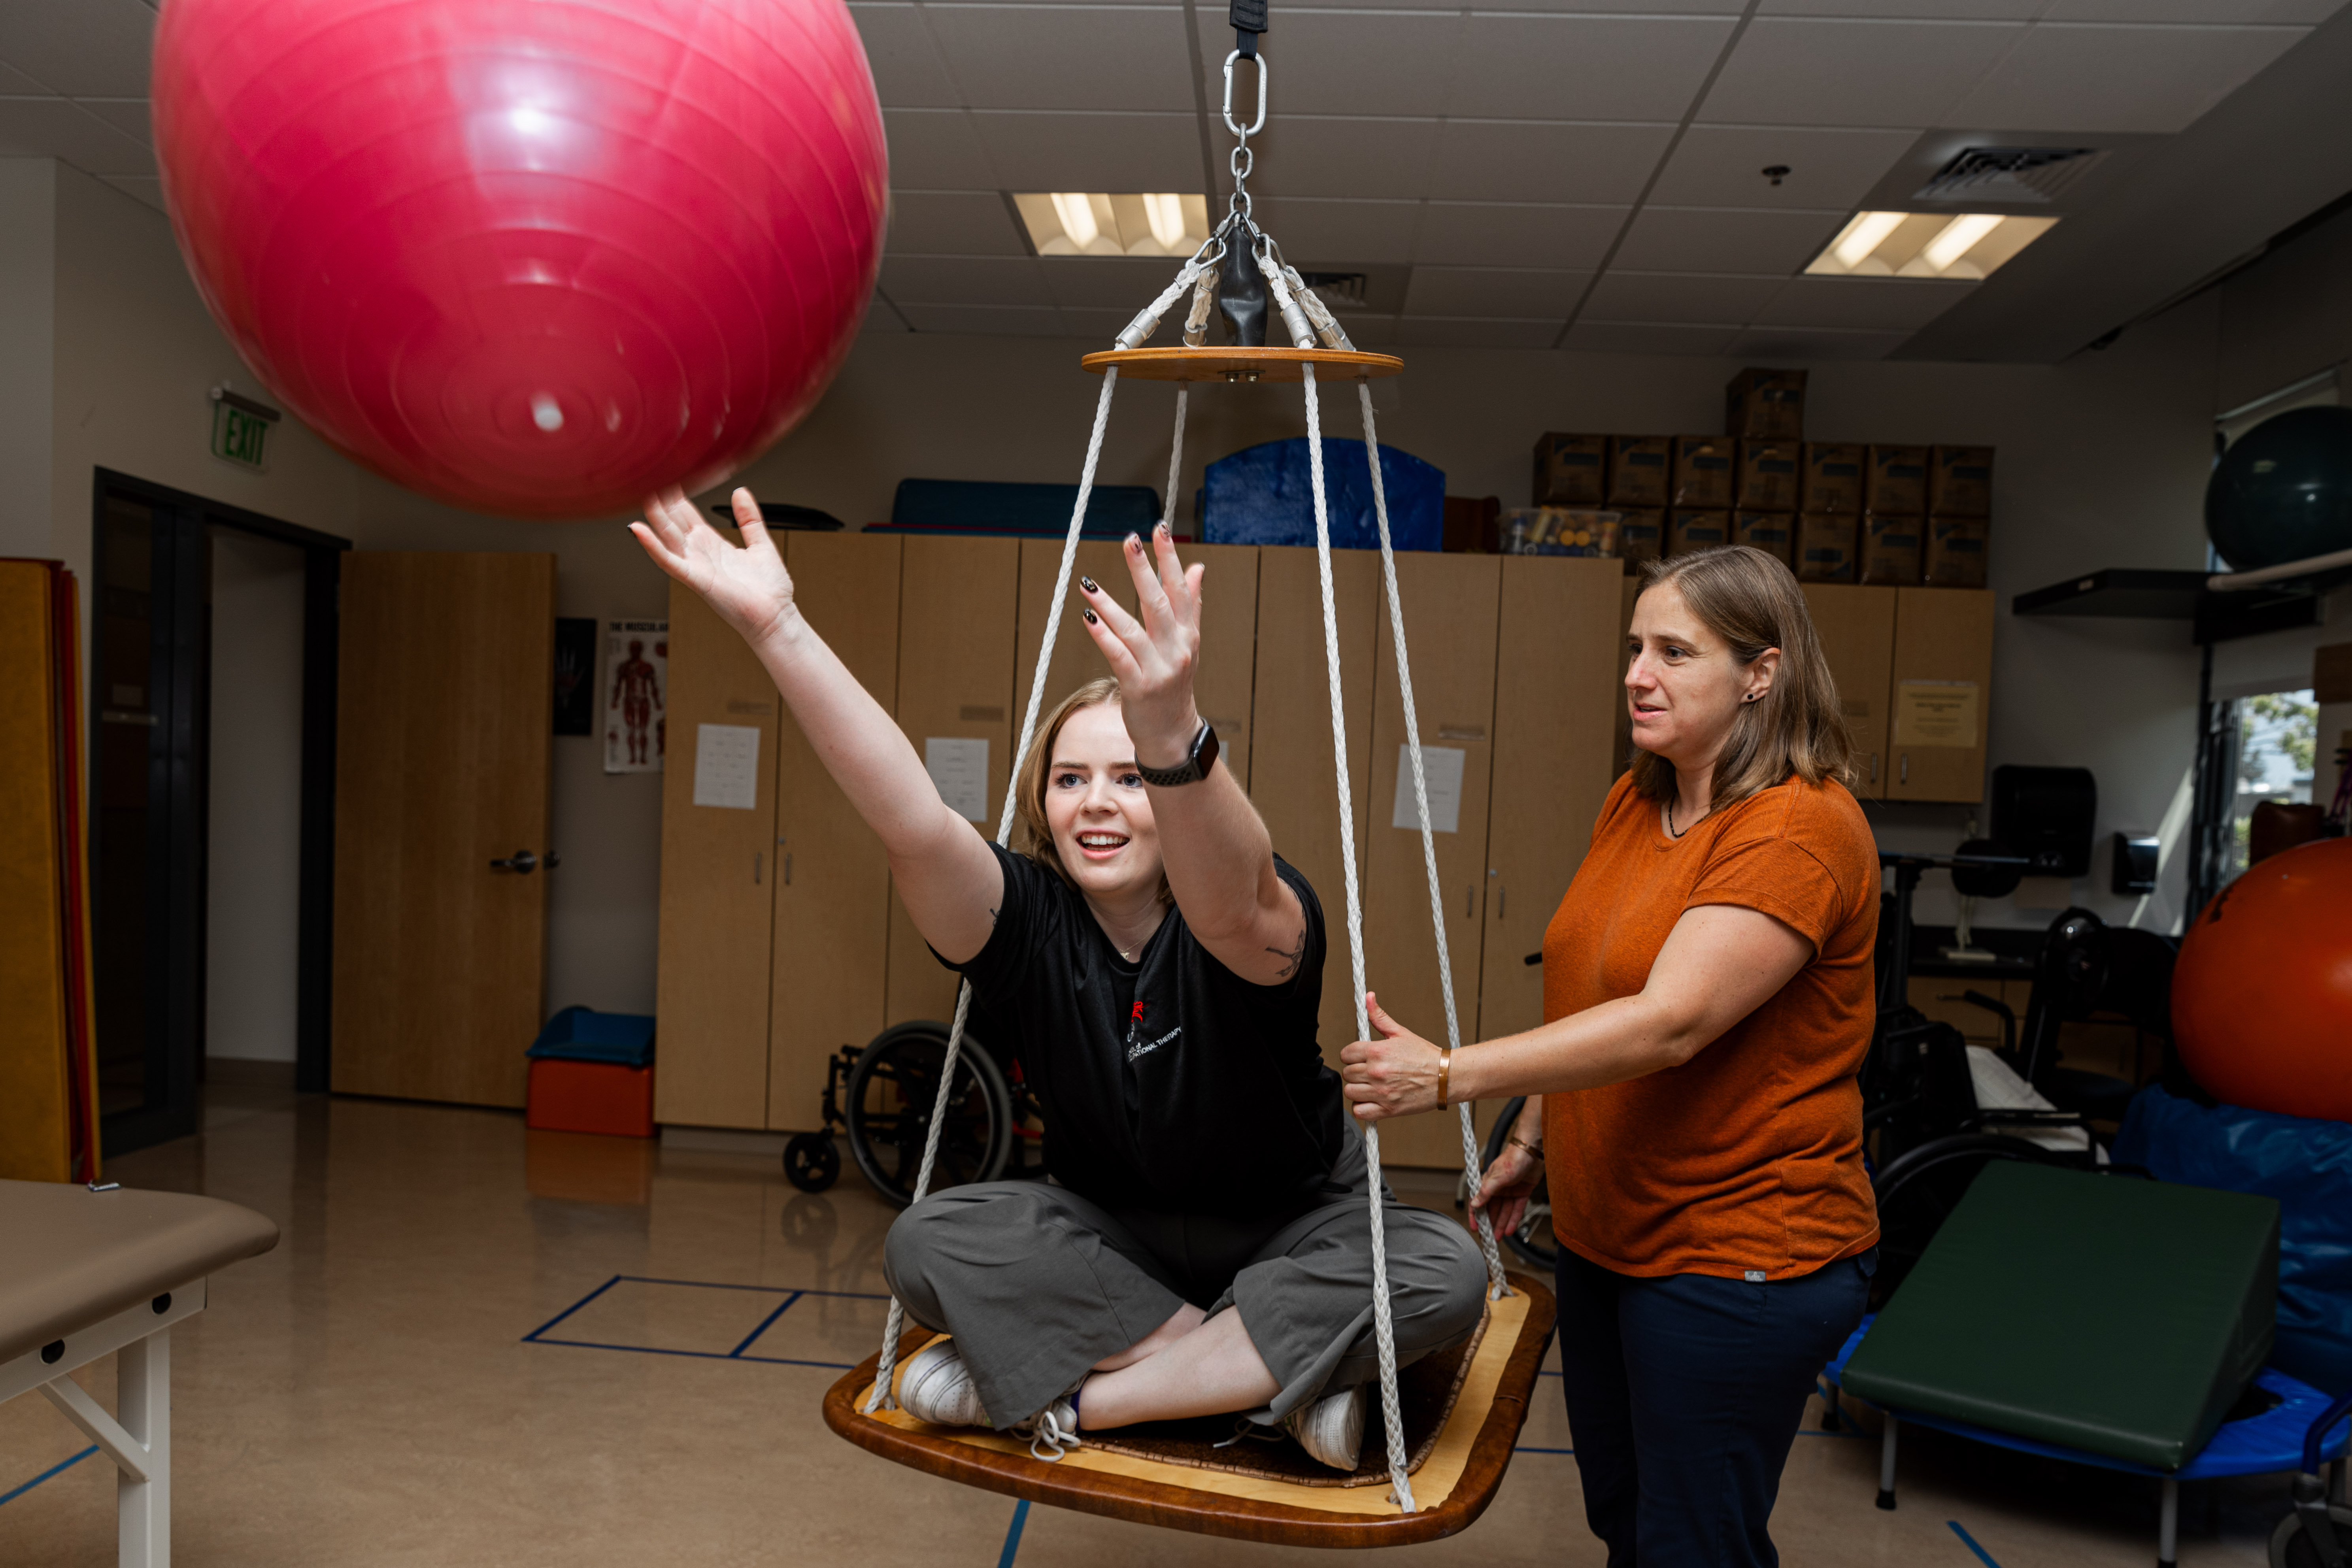 Two occupational therapy students demonstrate a therapy exercise that facilitates throwing and catching a yoga ball.